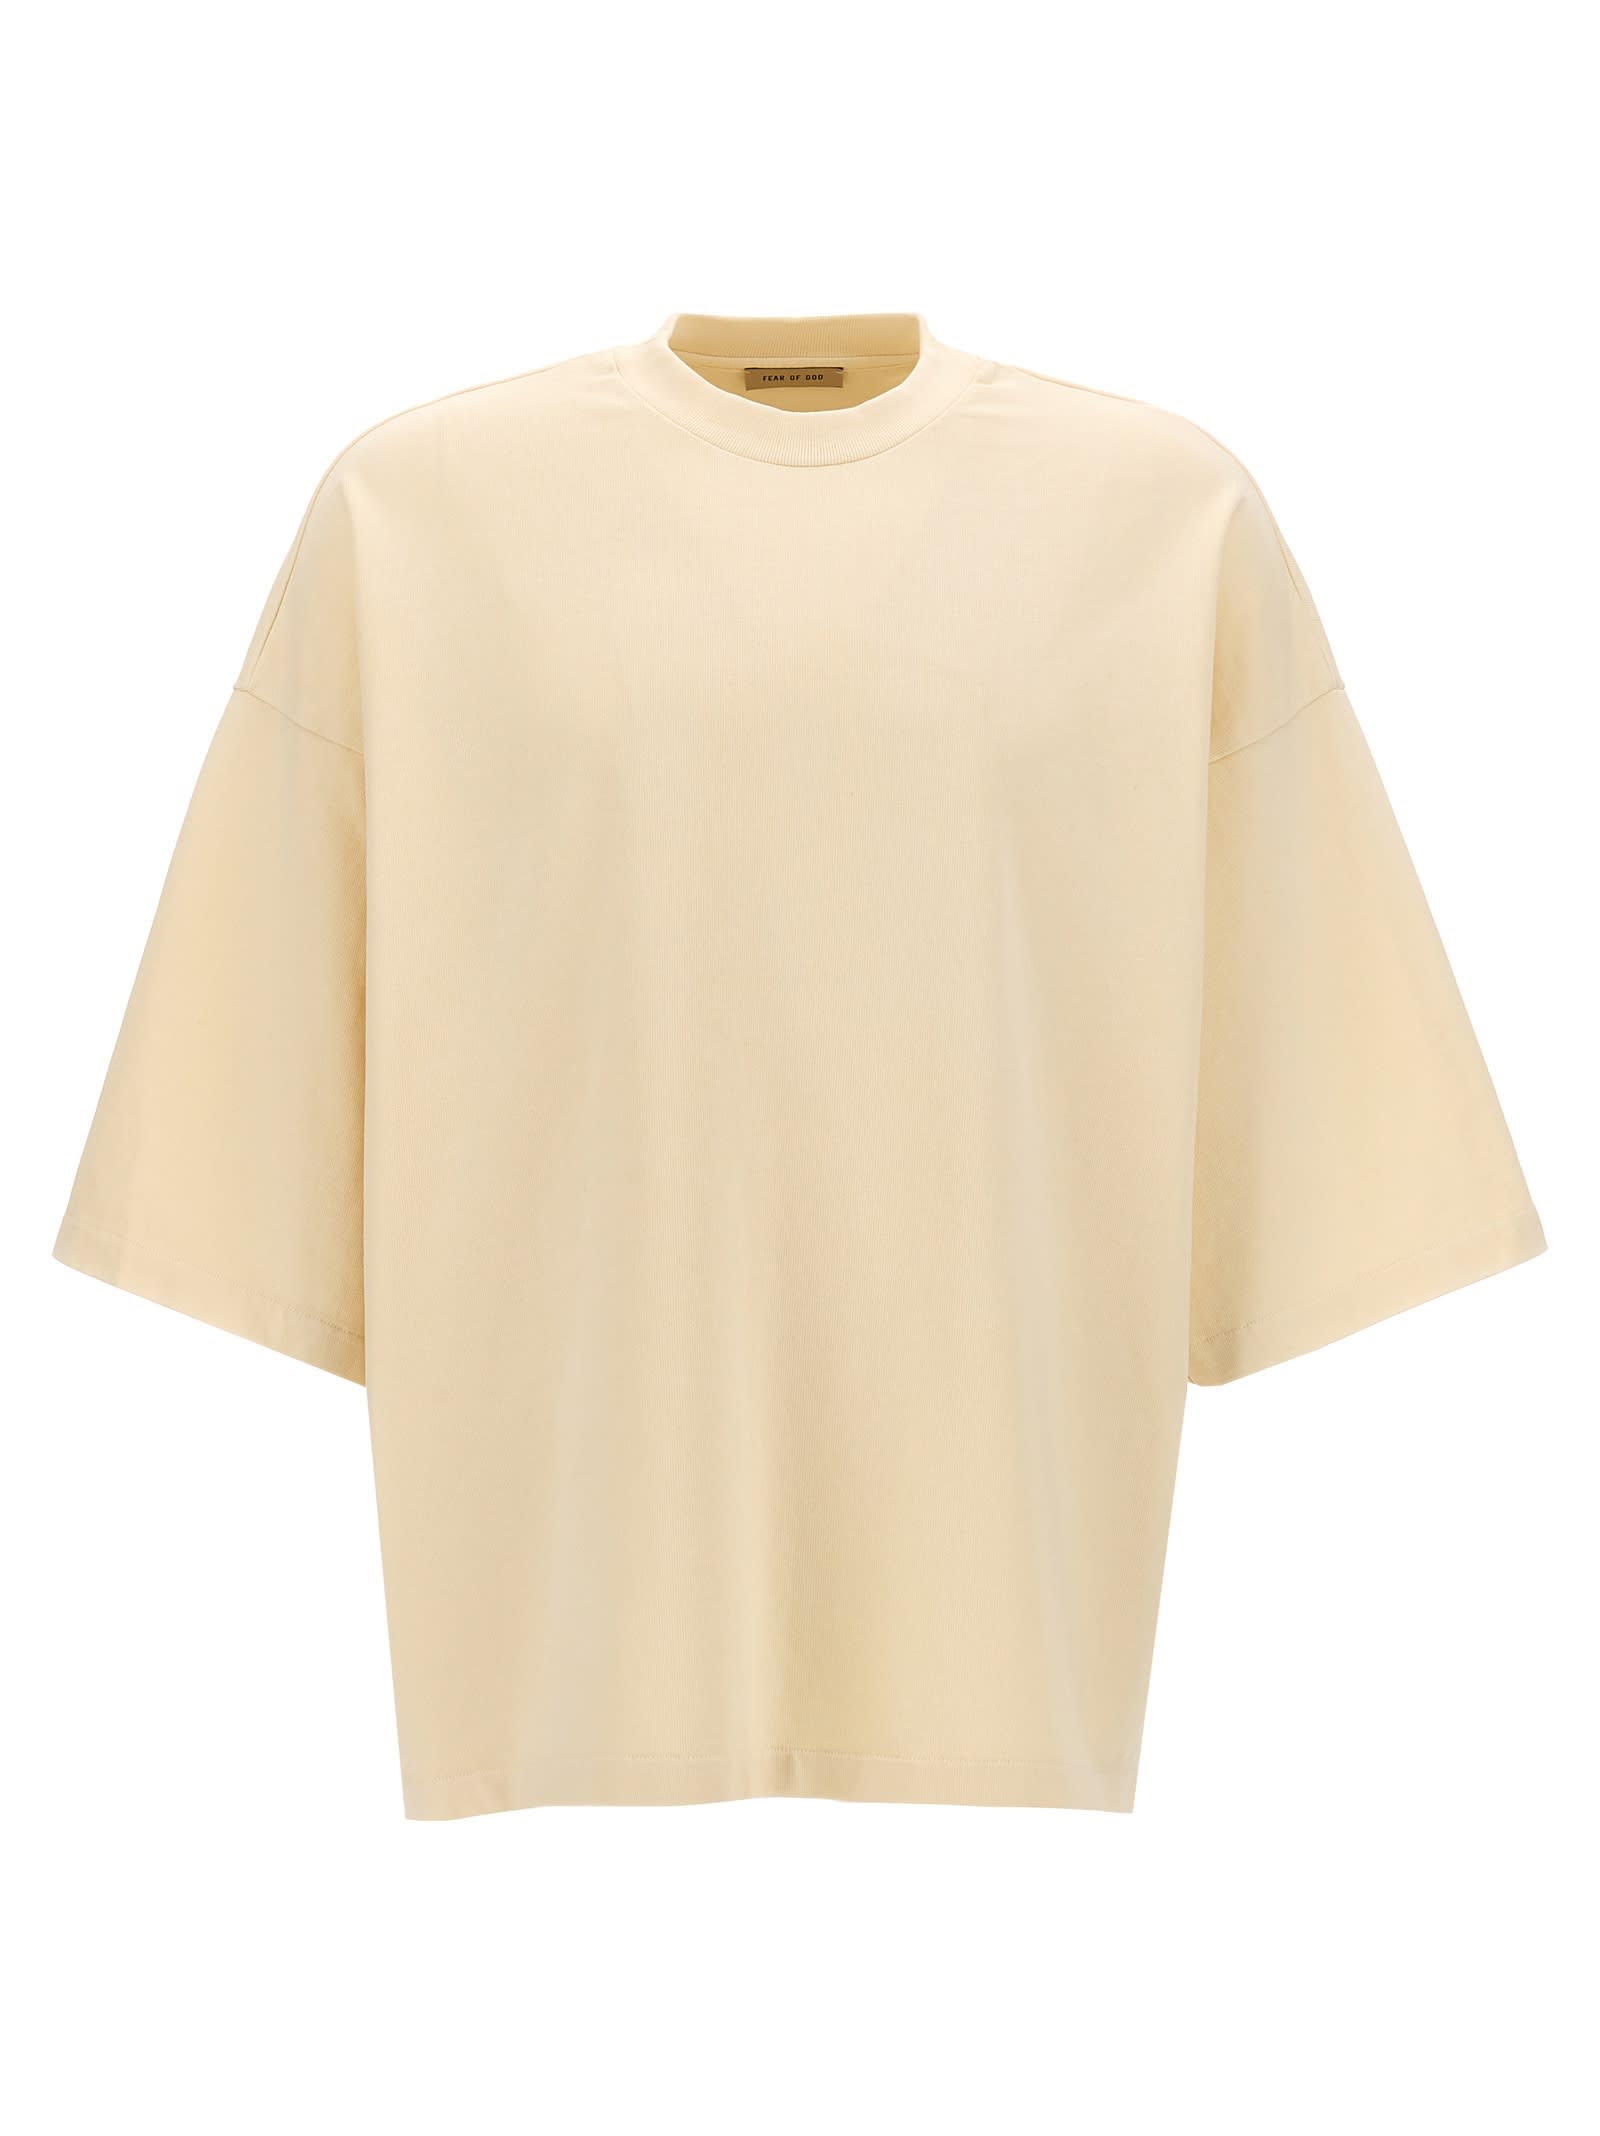 Fear Of God Airbrush 8 Ss Tee T-shirt In Beige